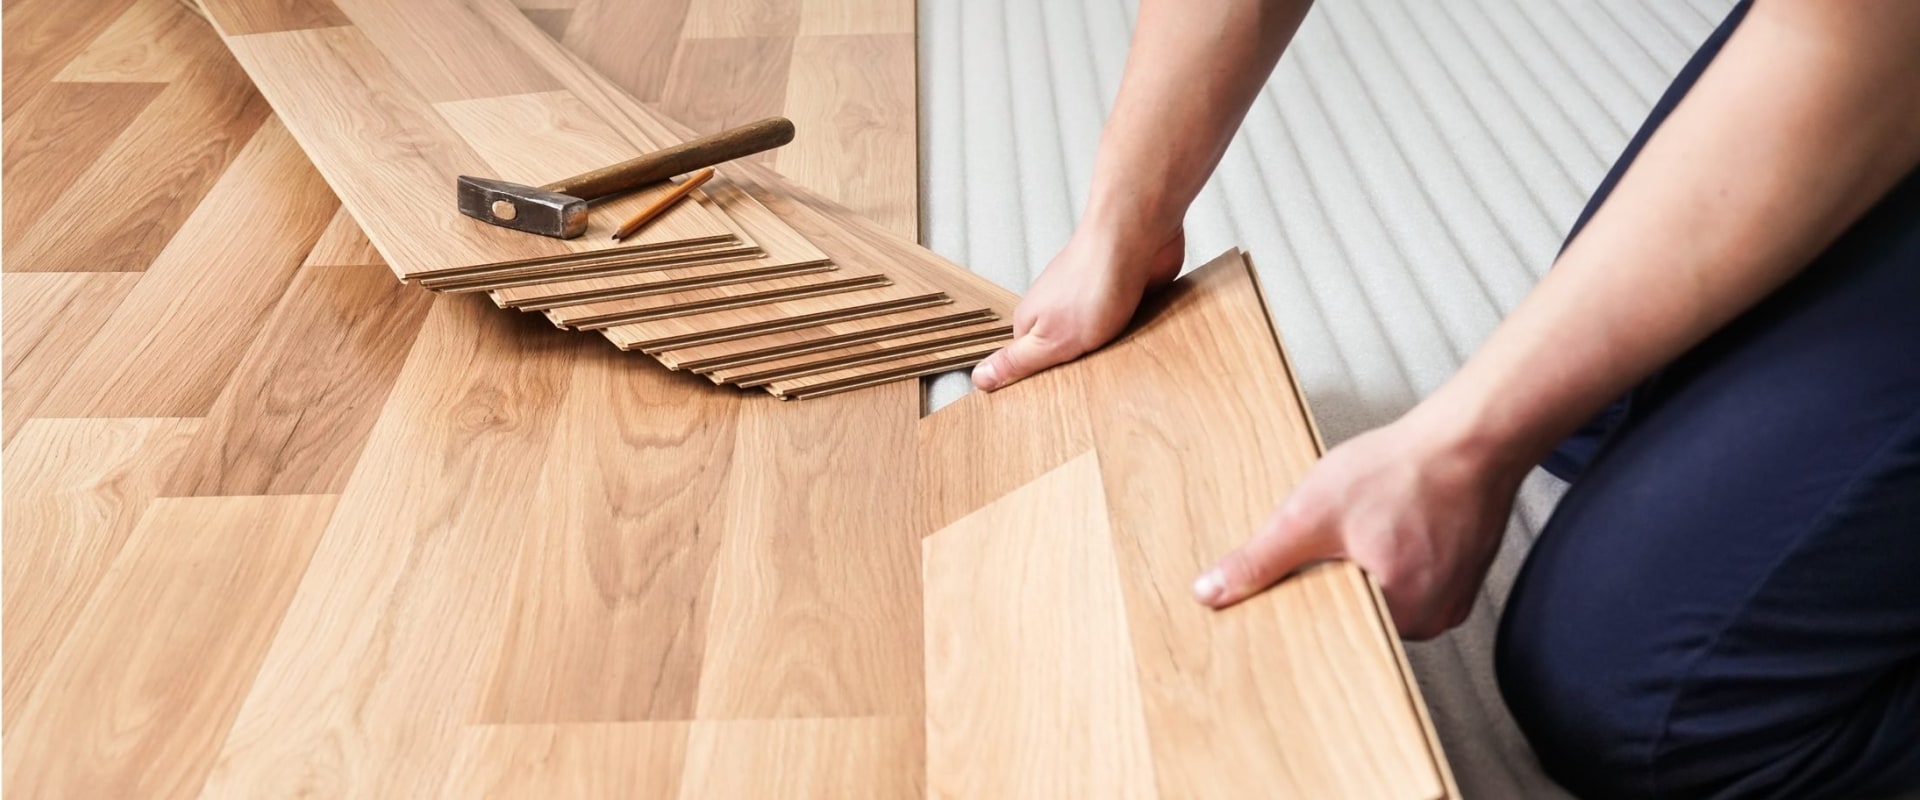 Wooden Floor vs Laminate: Which is Better?